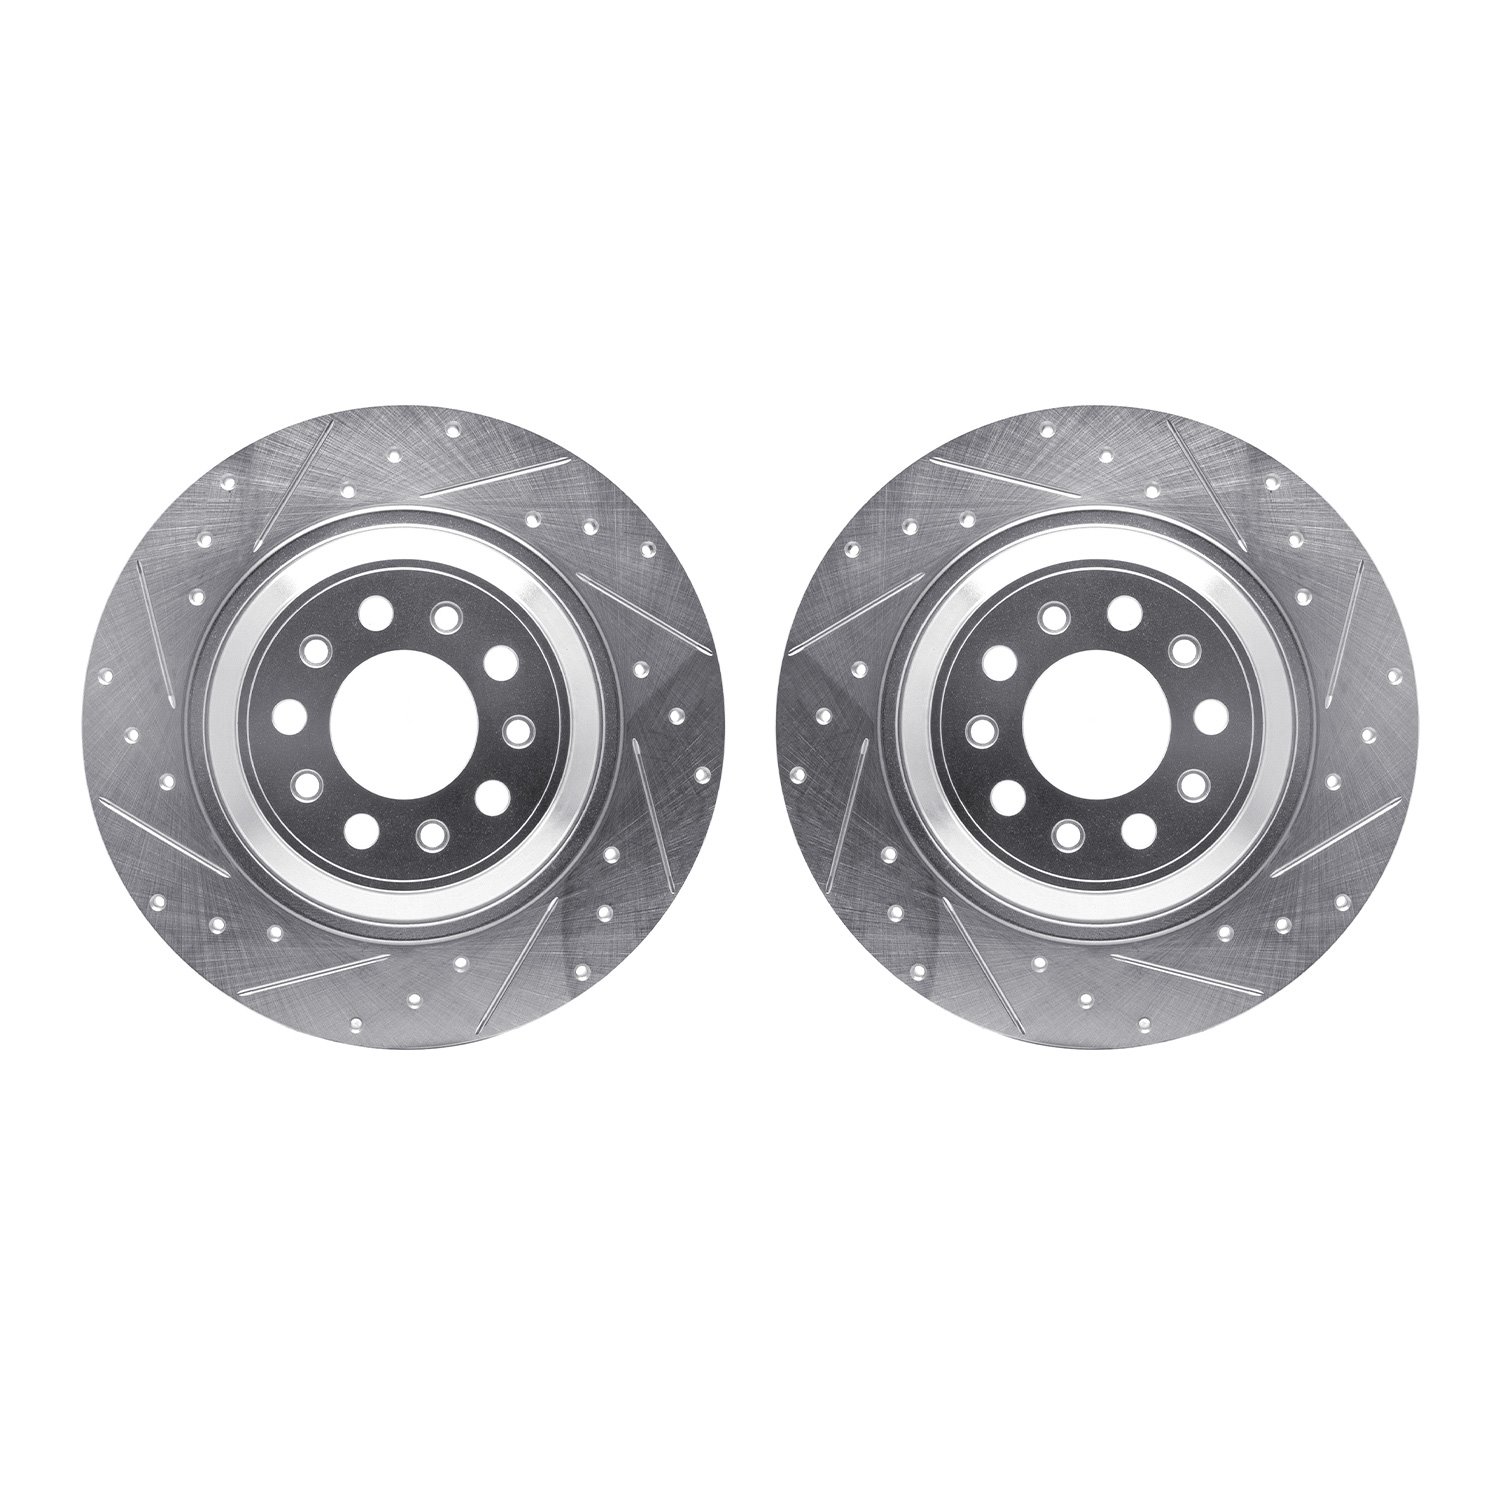 7002-42030 Drilled/Slotted Brake Rotors [Silver], Fits Select Mopar, Position: Rear